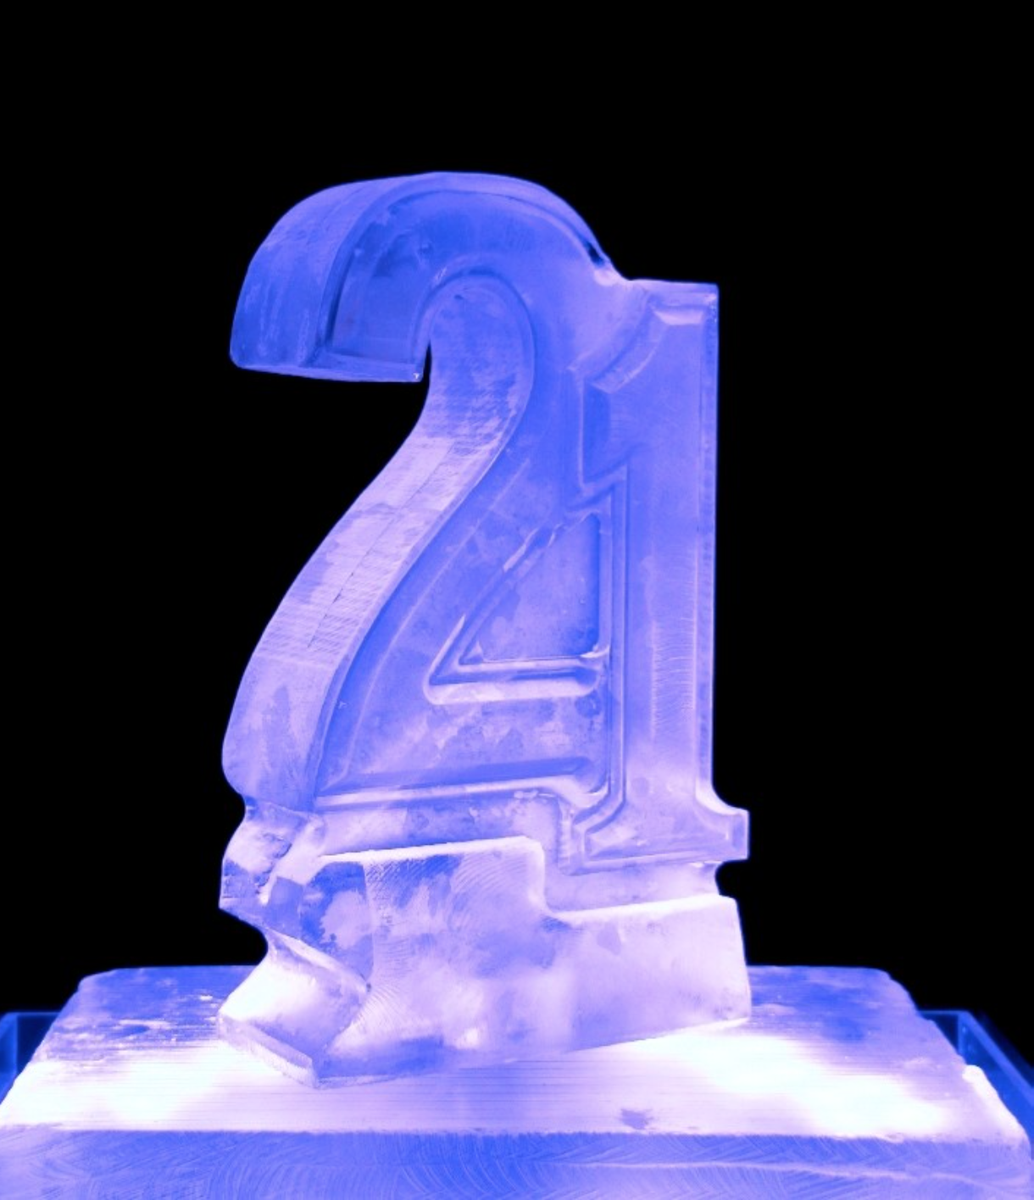 Is 21 your favorite number? Freeze it on FreezeCrowd.com #YourNumbers #FavoriteNumbers #Numbers